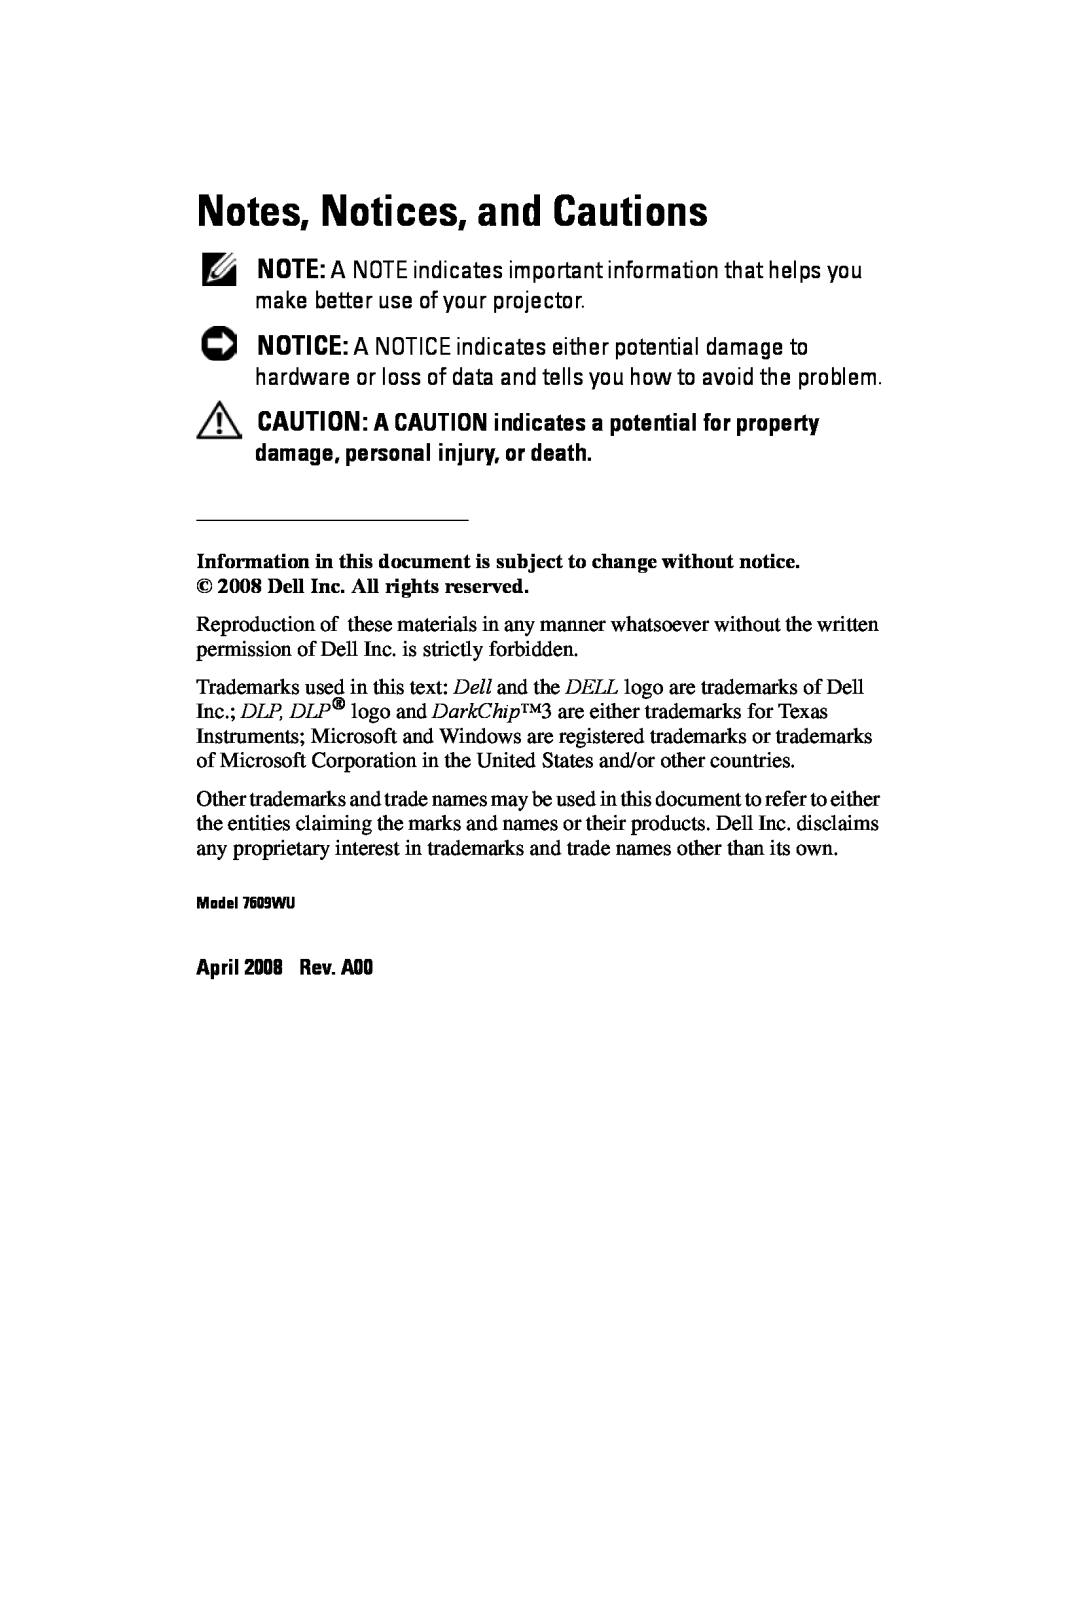 Dell 7609WU manual Notes, Notices, and Cautions, April 2008 Rev. A00 